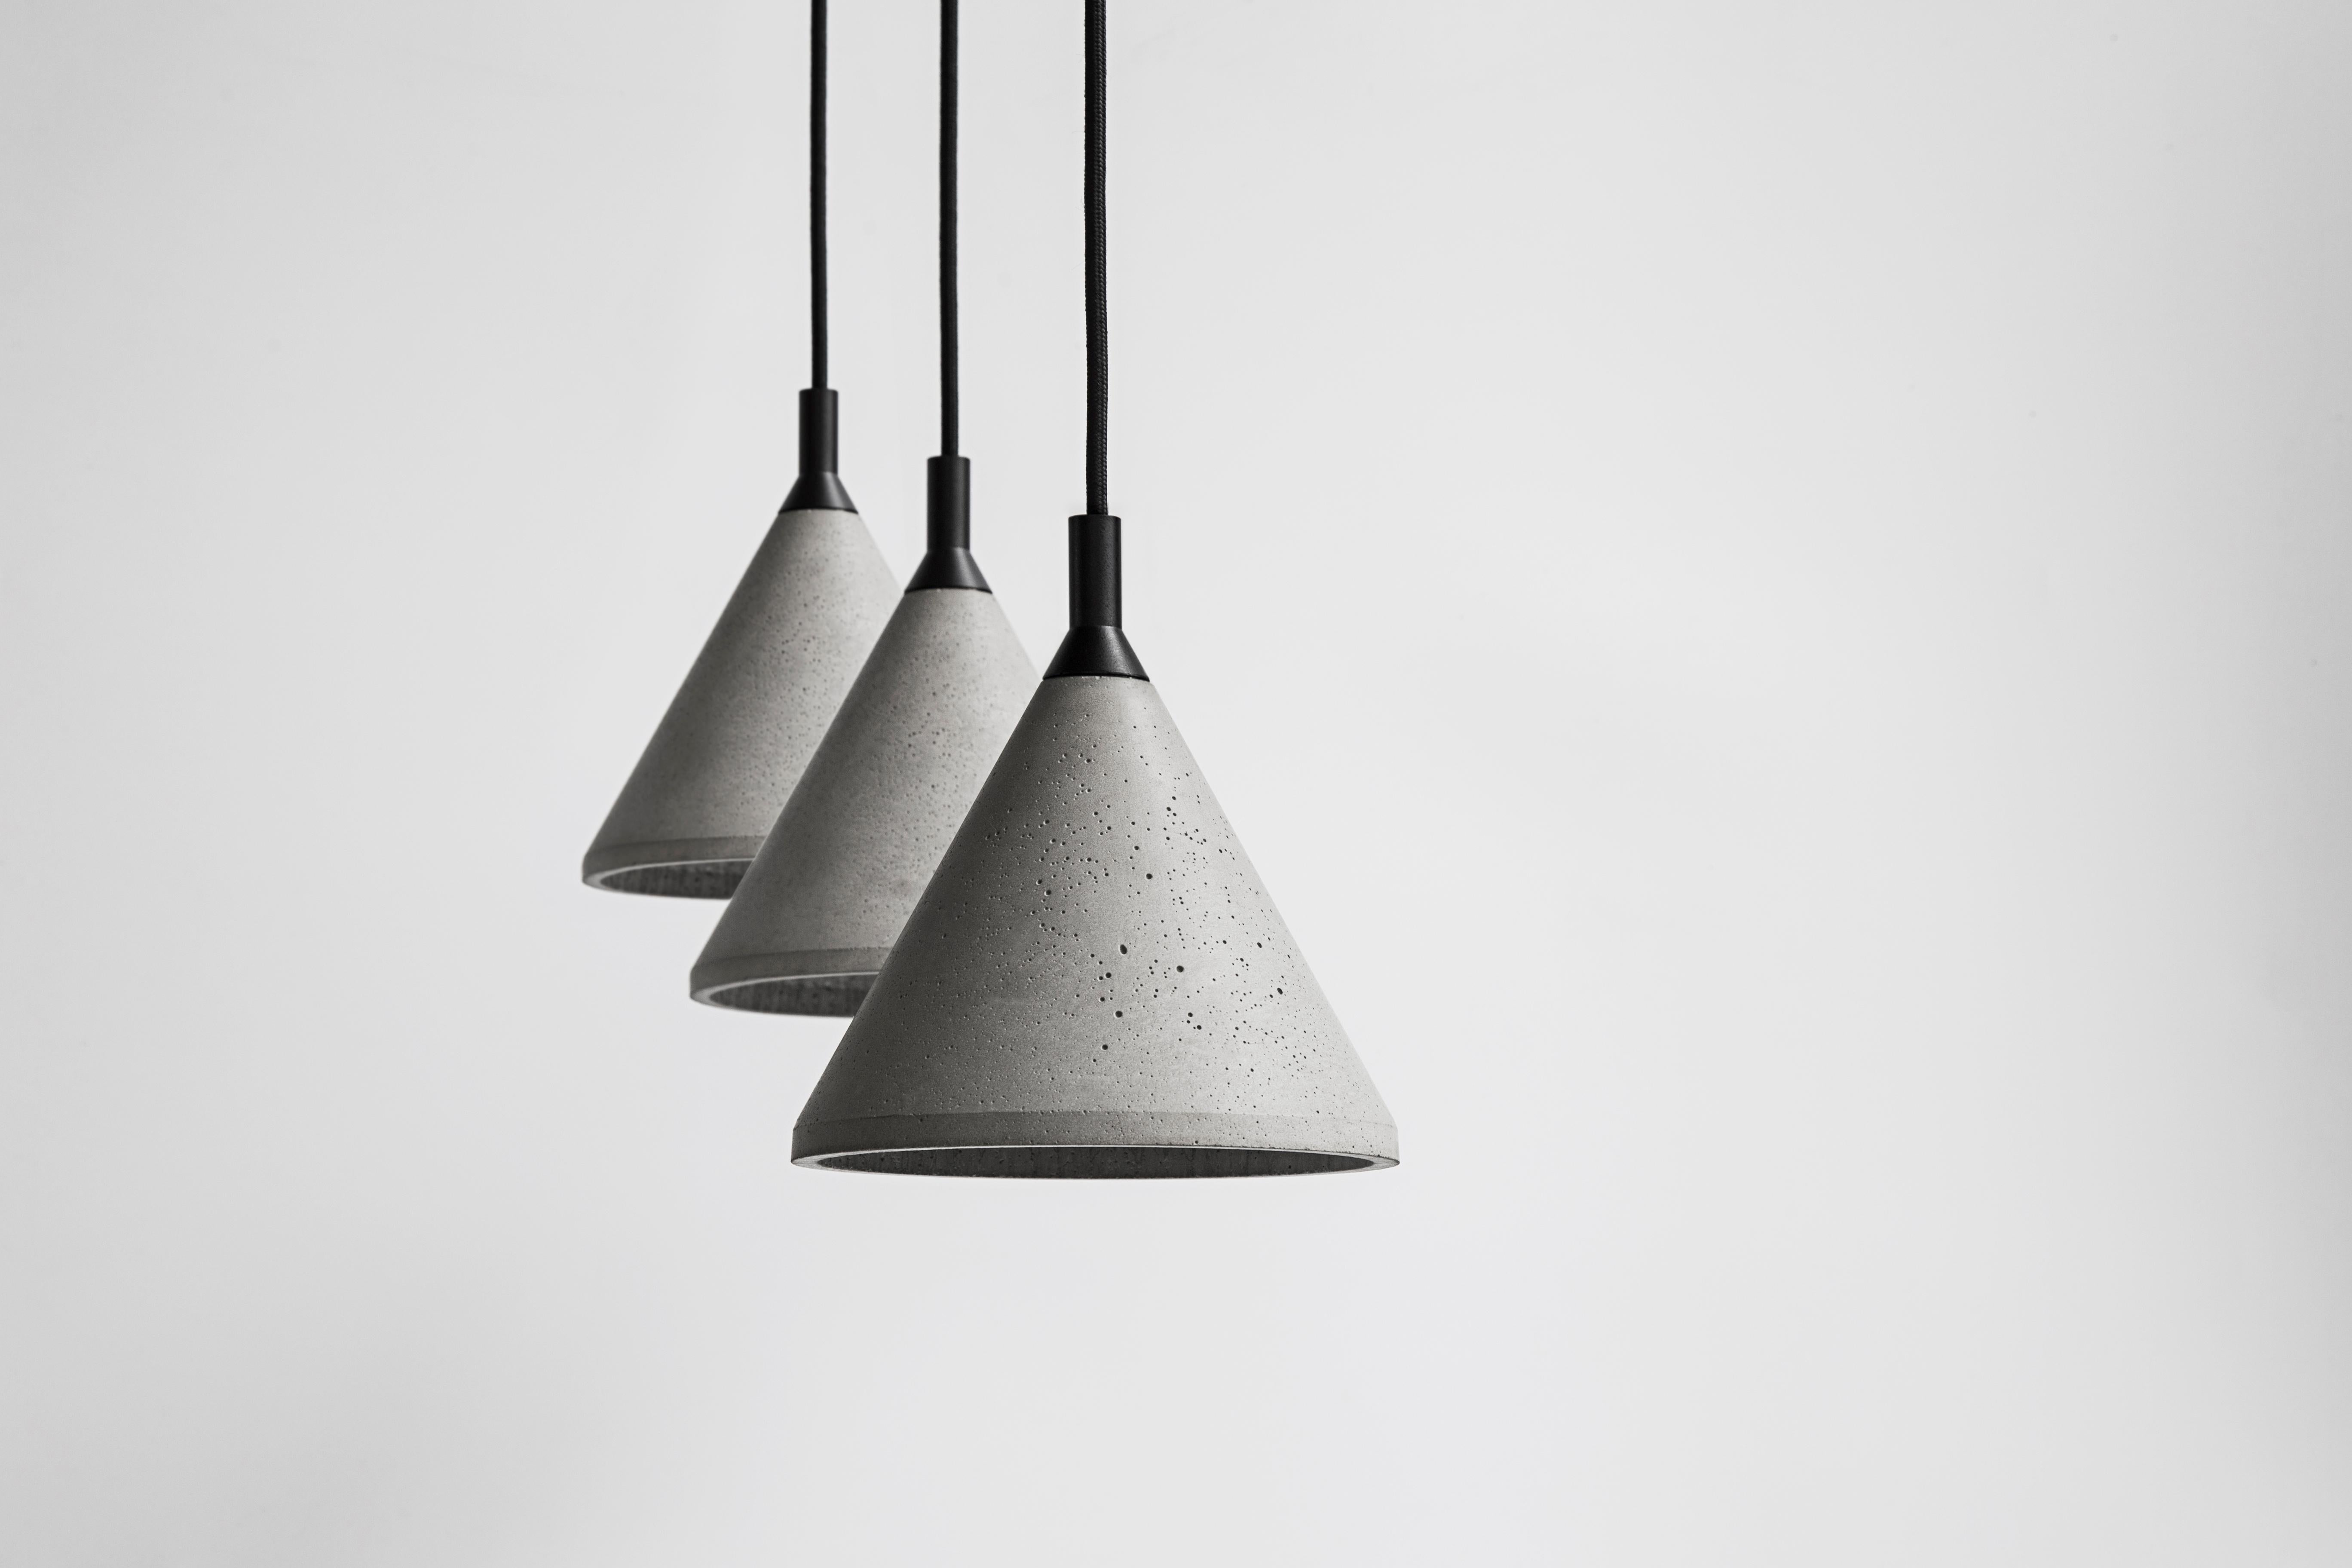 Chinese Concrete and Aluminum Pendant Lamp, “Zhong, ” from Concrete Collection by Bentu